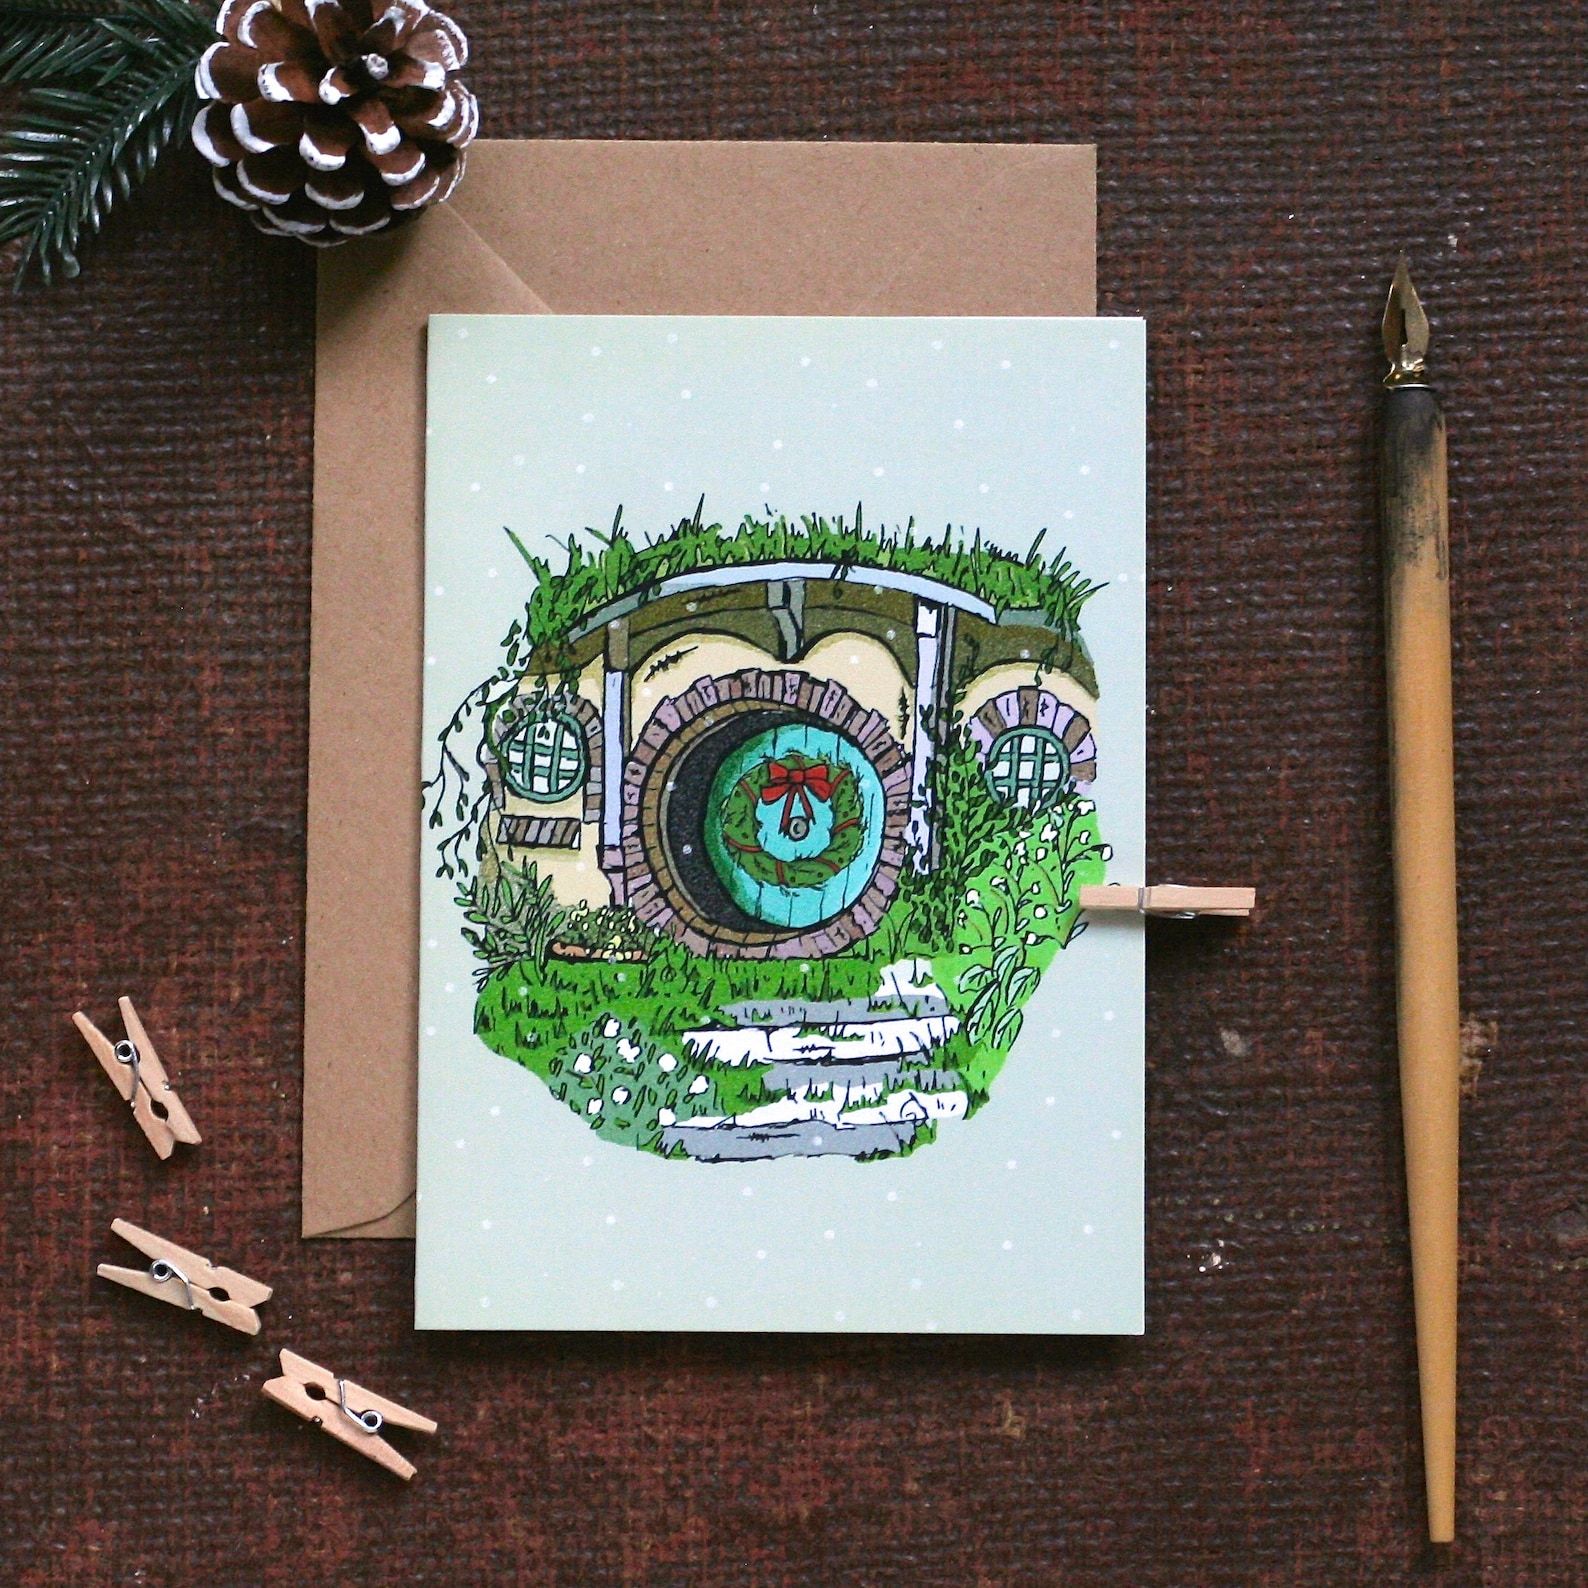 A painting of a Hobbit hole with a wreath on the door and snowflakes falling.